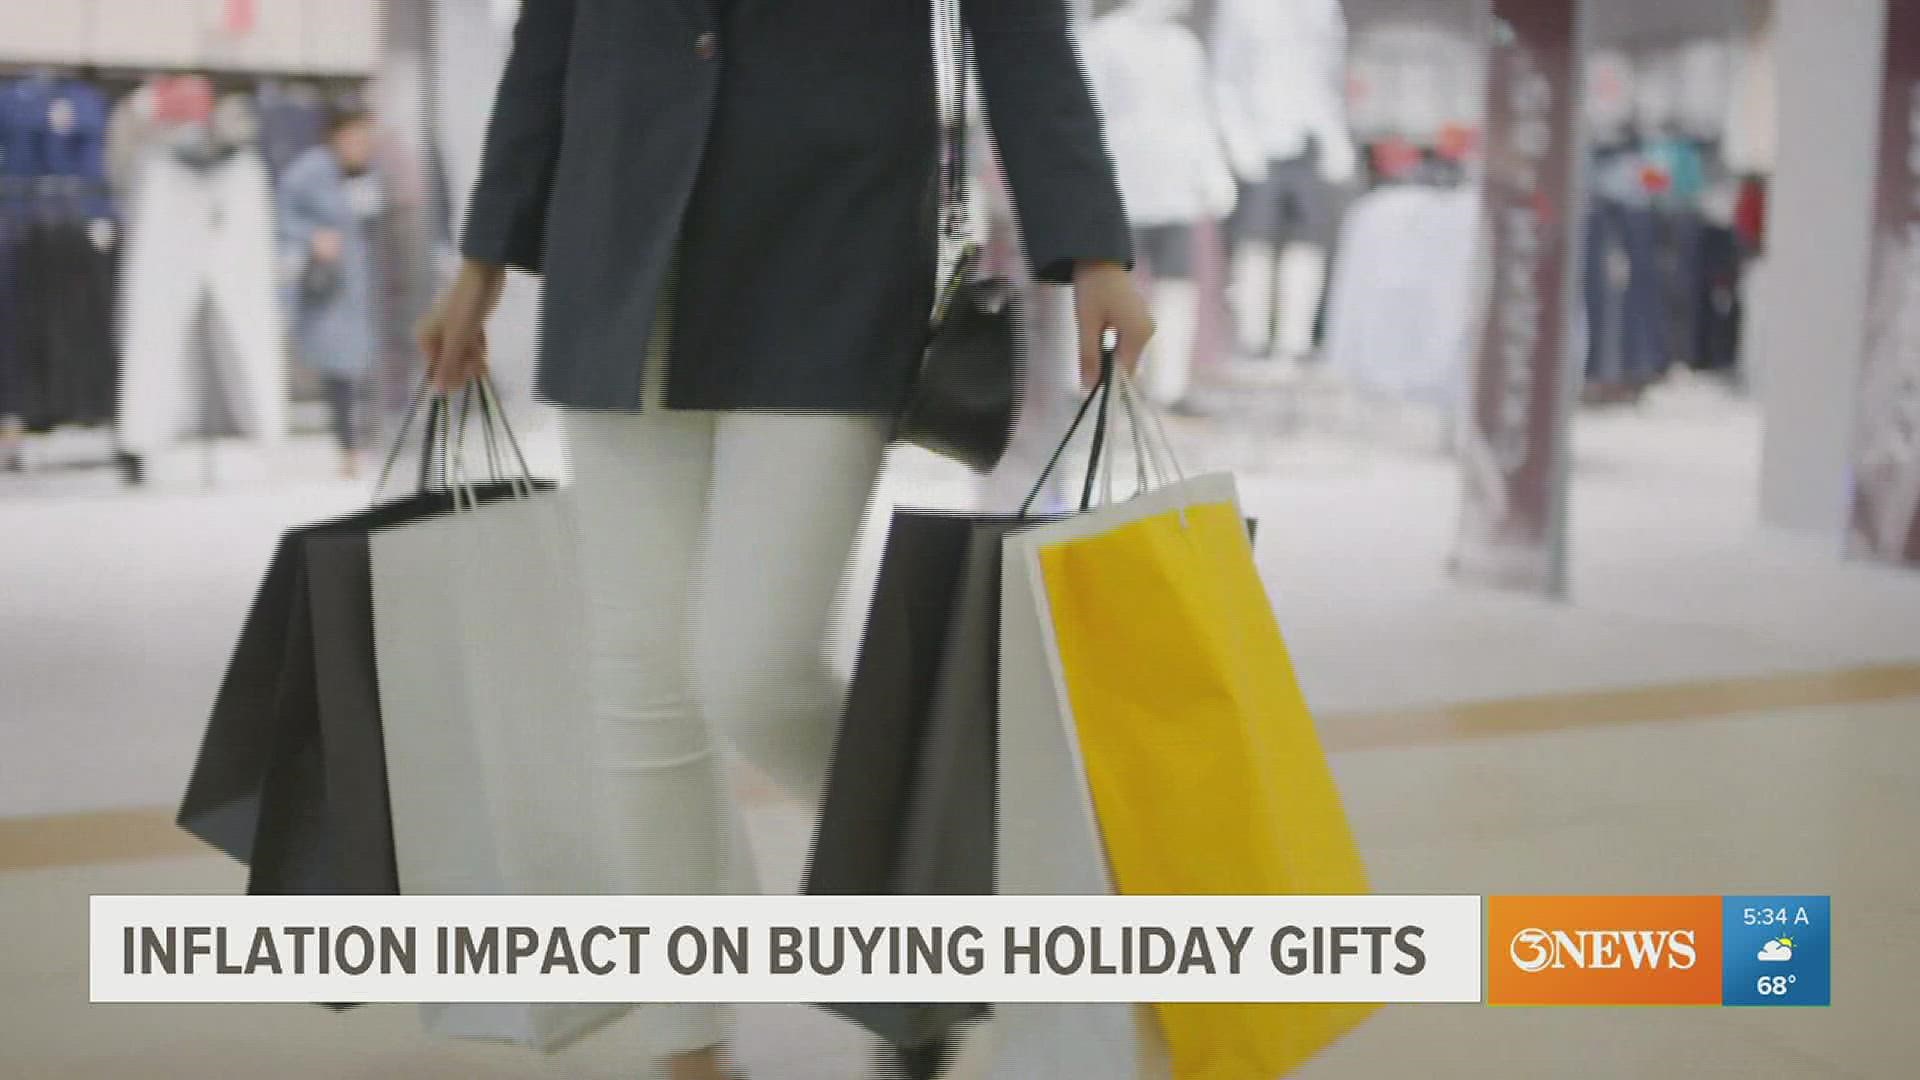 Inflation makes an impact on holiday gifting